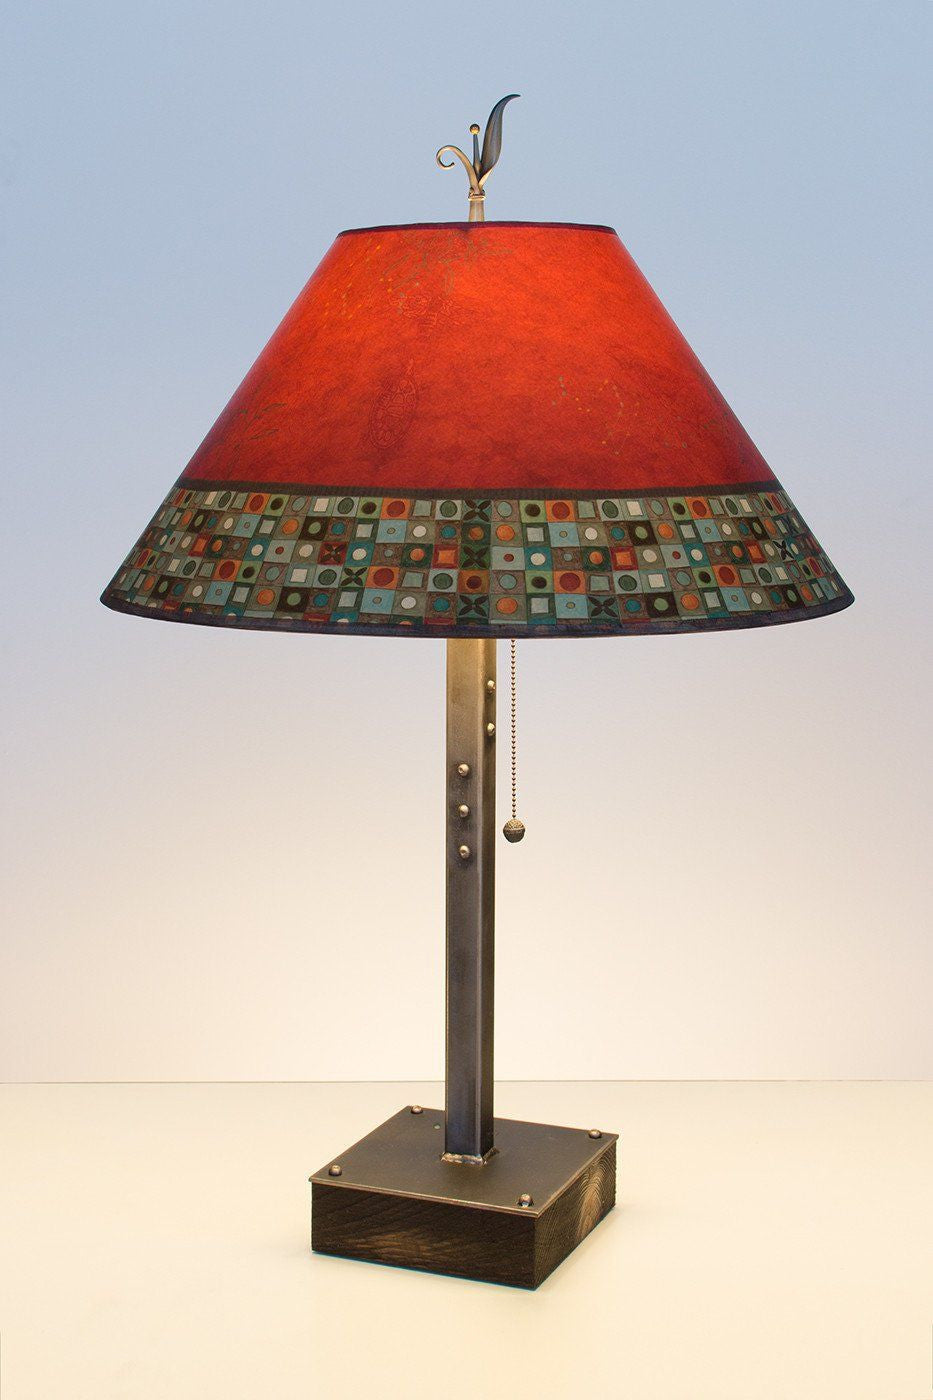 Janna Ugone &amp; Co Table Lamps Steel Table Lamp on Wood with Large Conical Shade in Red Mosaic